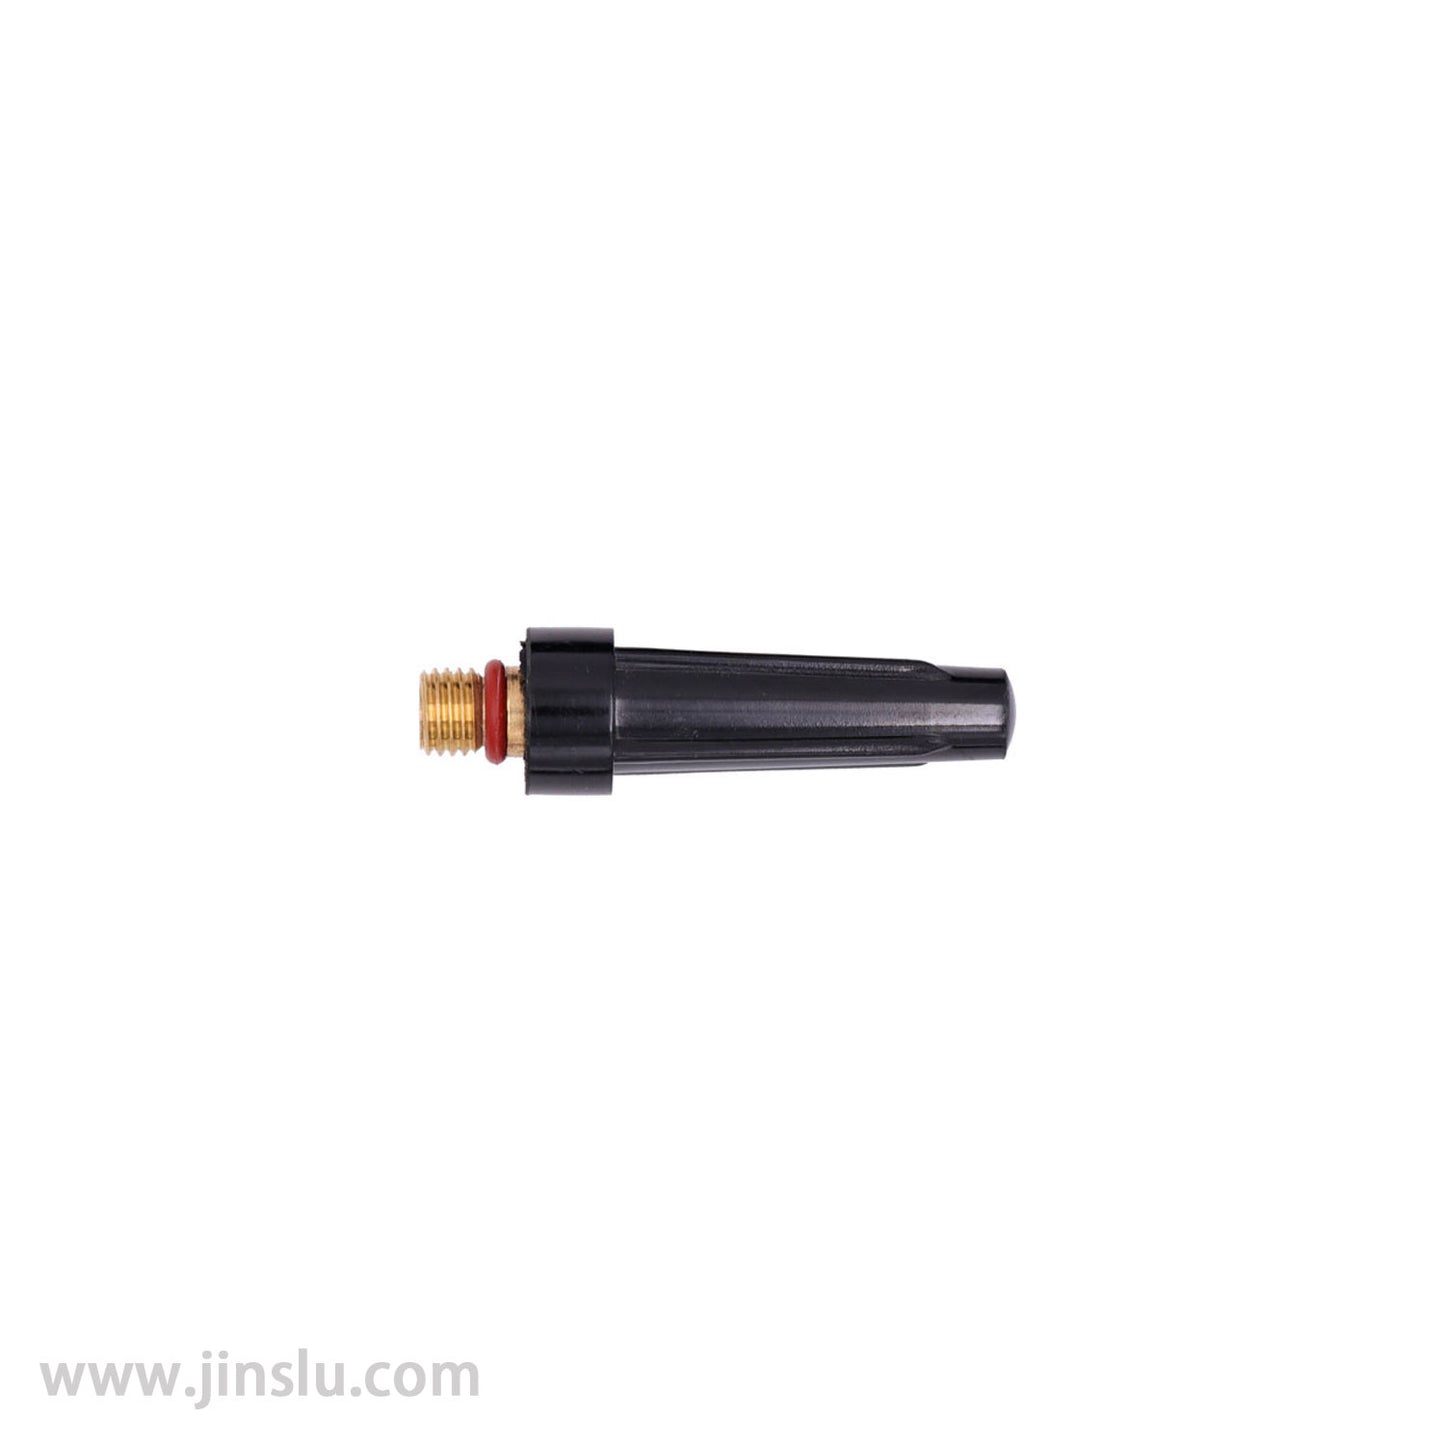 WP-9 TIG Torch Consumable